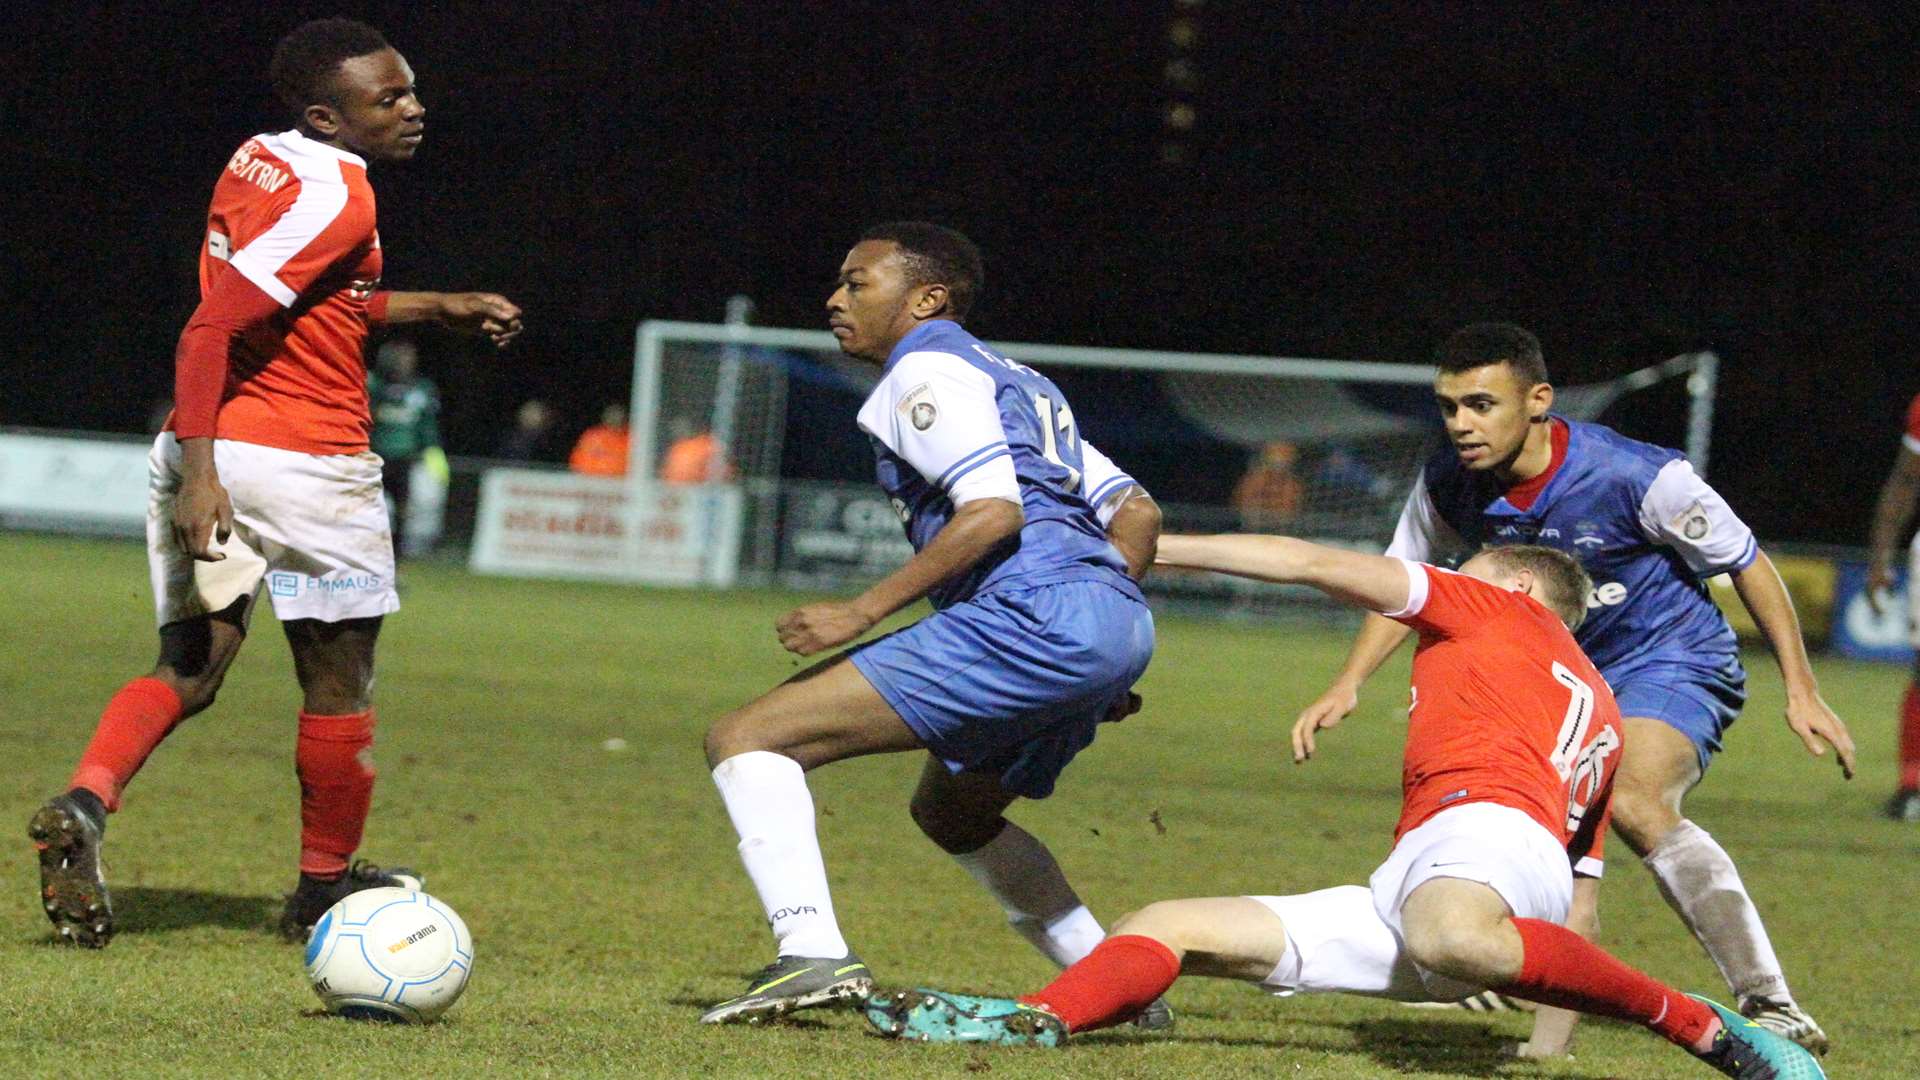 Margate's Charles Banya looks for a way through the Charlton defence during Wednesday's 2-1 Kent Reliance Senior Cup defeat at Hartsdown. Picture: Don Walker